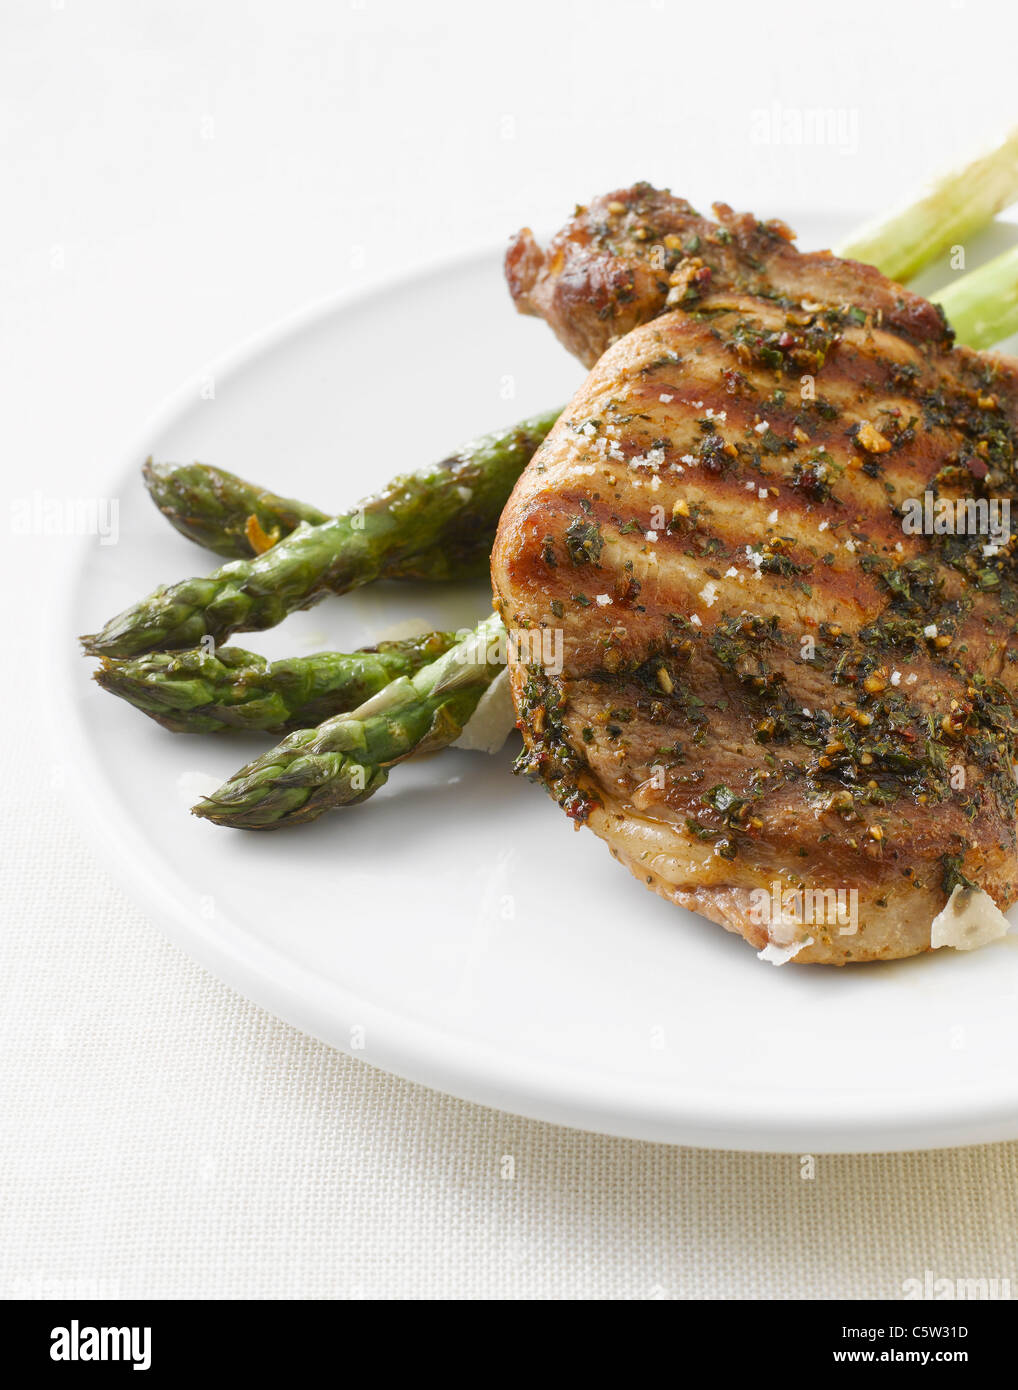 Grilled pork chop and green asparagus on plate Stock Photo